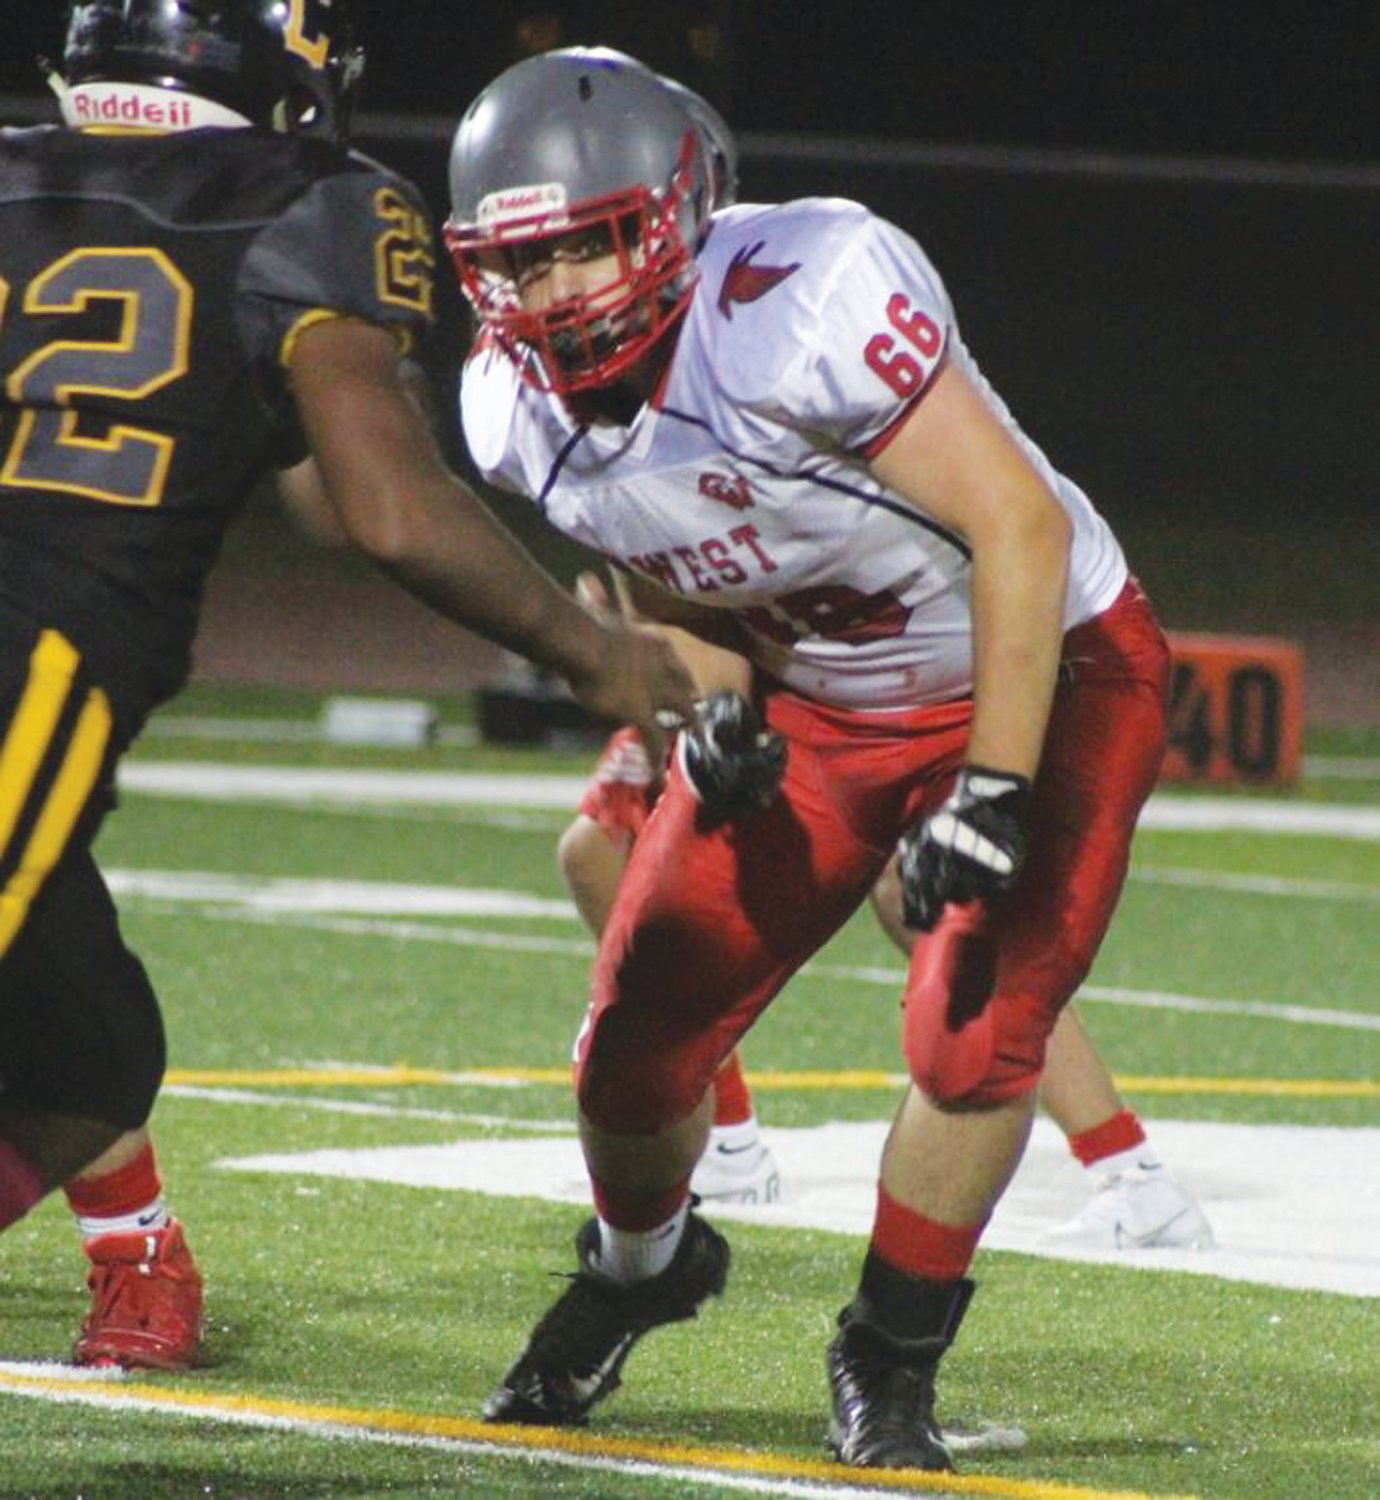 ON THE LINE: West’s Anthony Perrotta looks to make a block.